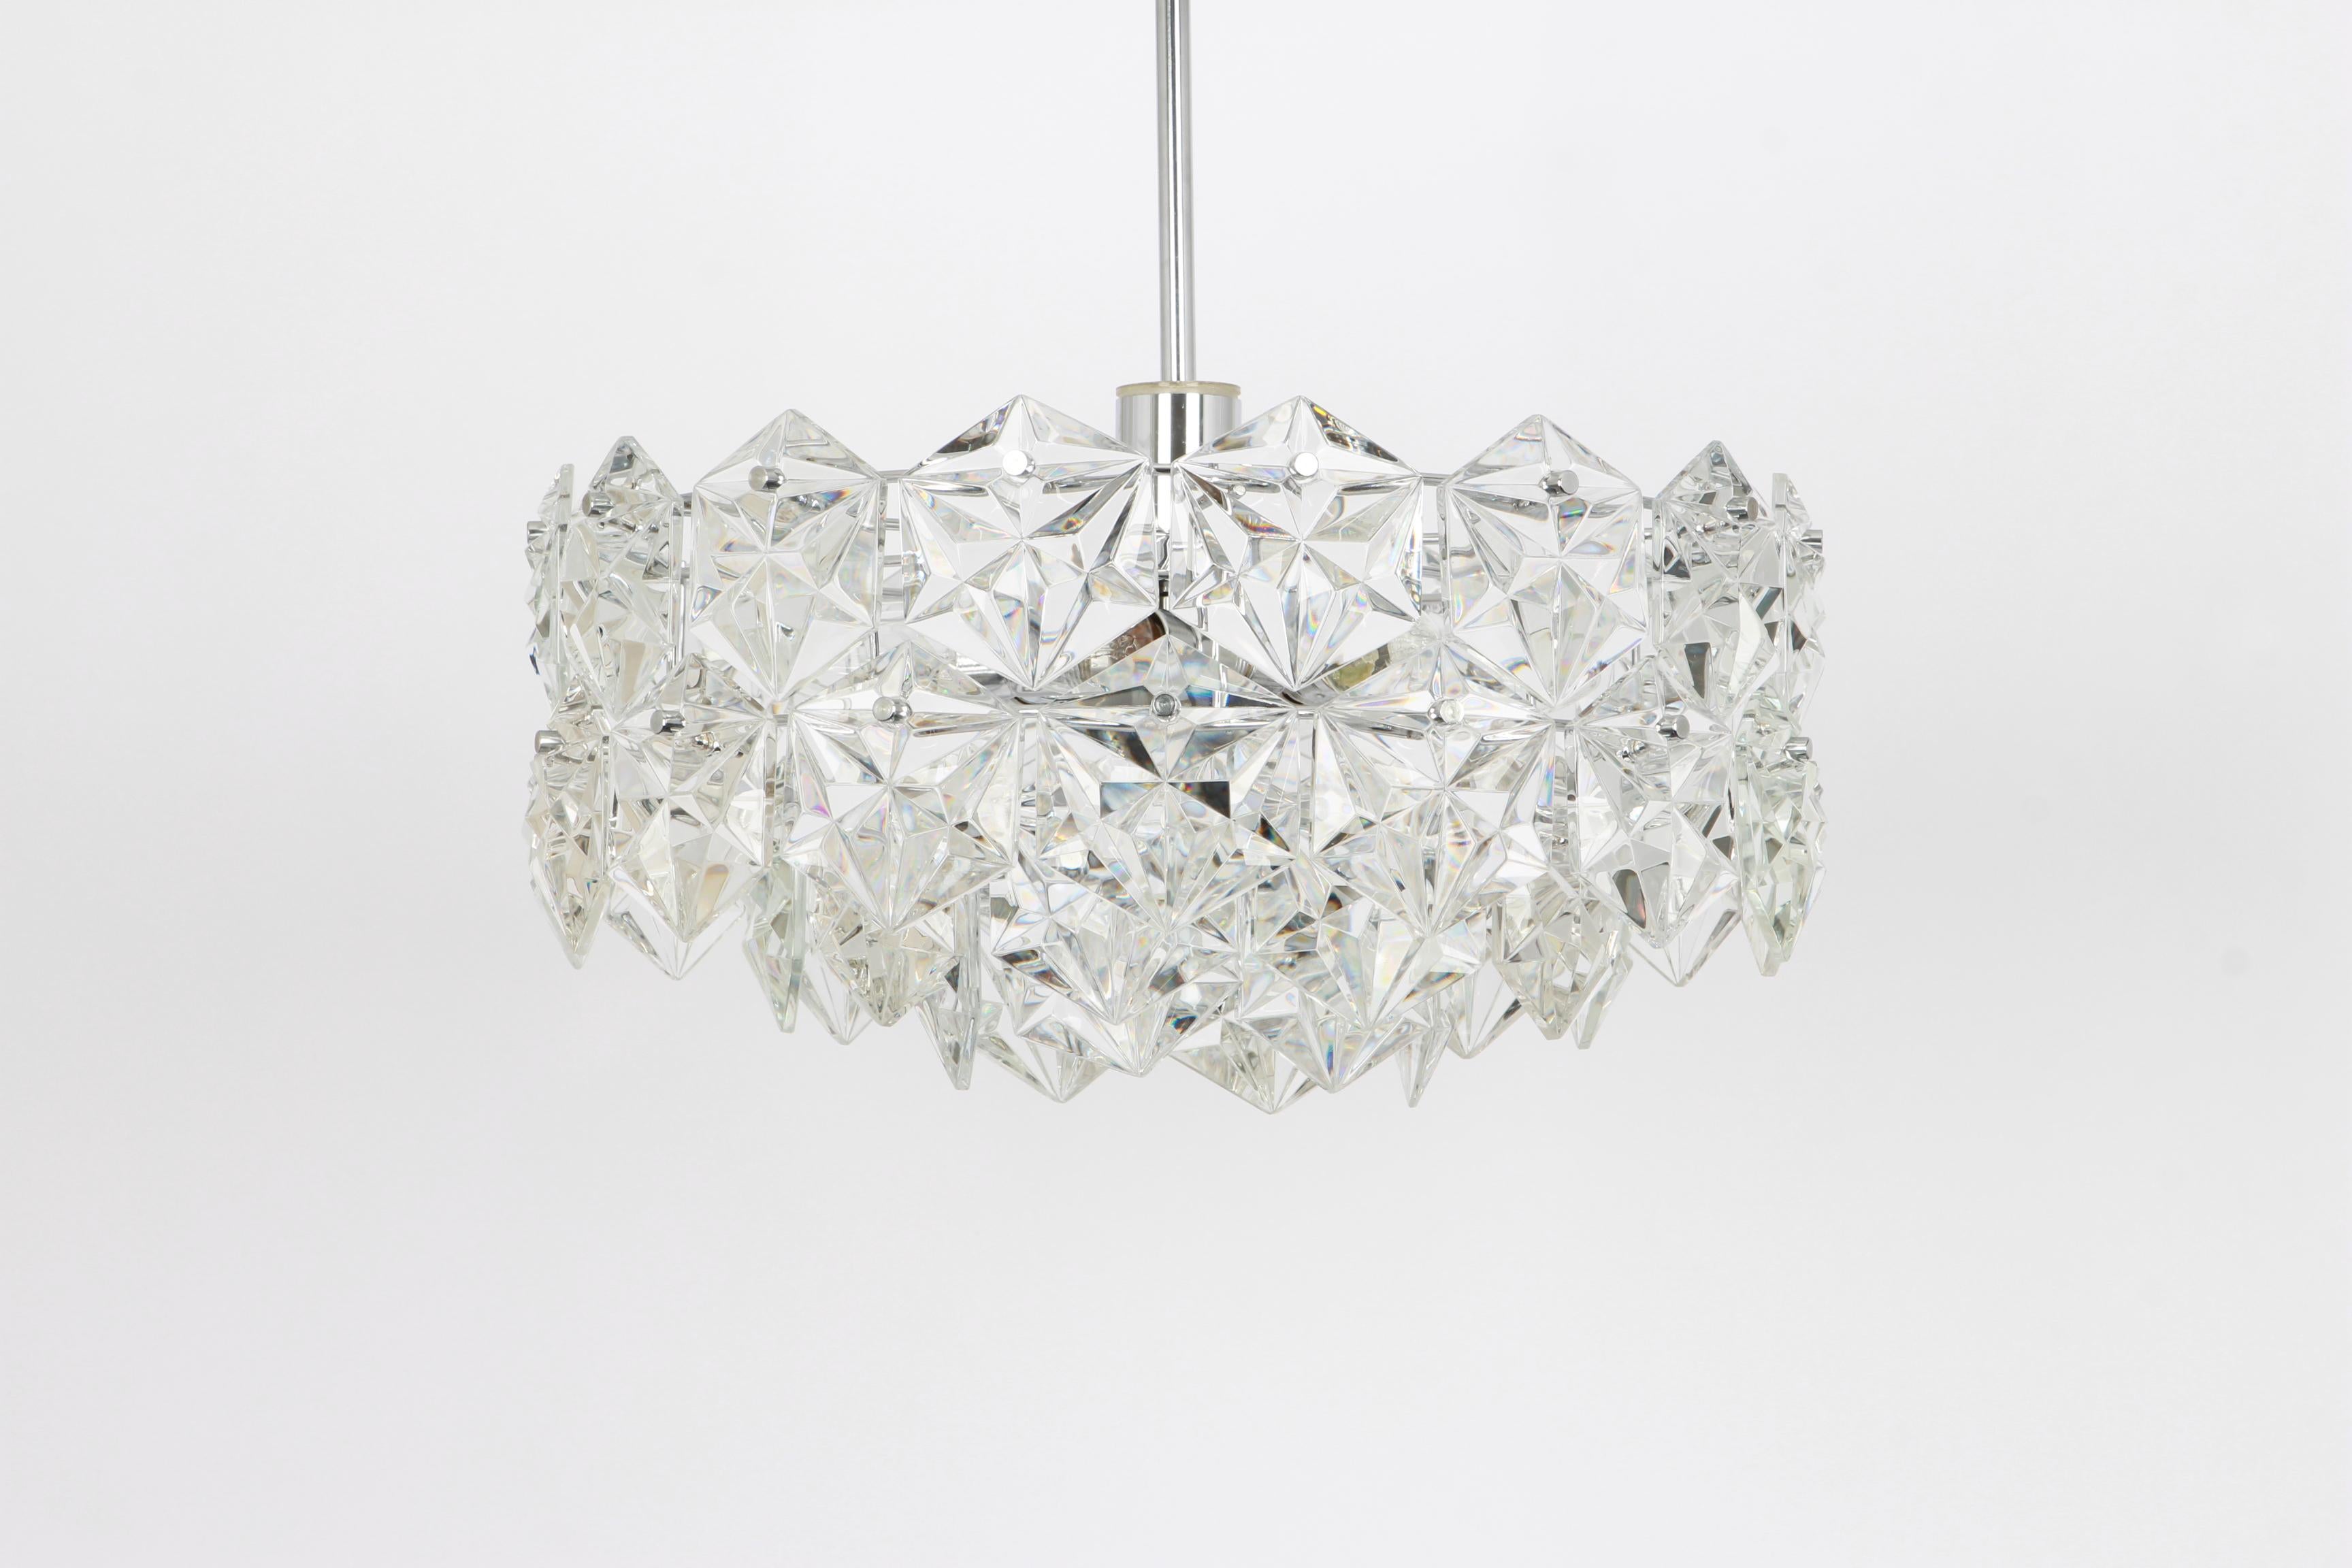 A stunning four-tier chandelier by Kinkeldey, Germany, manufactured in circa 1970-1979. A handmade and high quality piece. The chandelier features a chrome four-tier structure with lots of facetted crystal glass elements.

High quality and in very